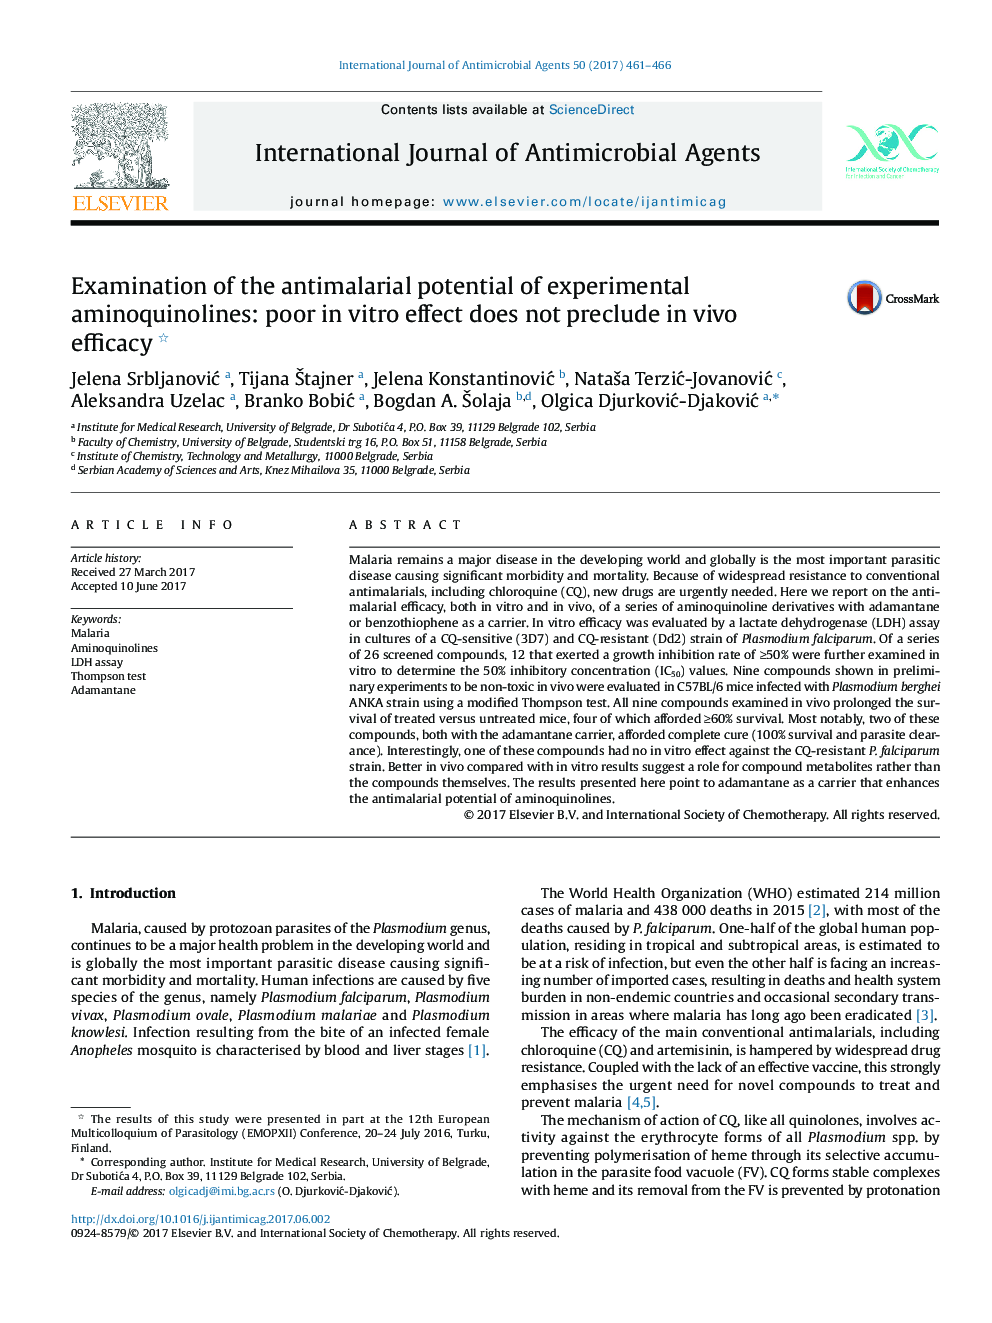 Examination of the antimalarial potential of experimental aminoquinolines: poor in vitro effect does not preclude in vivo efficacy